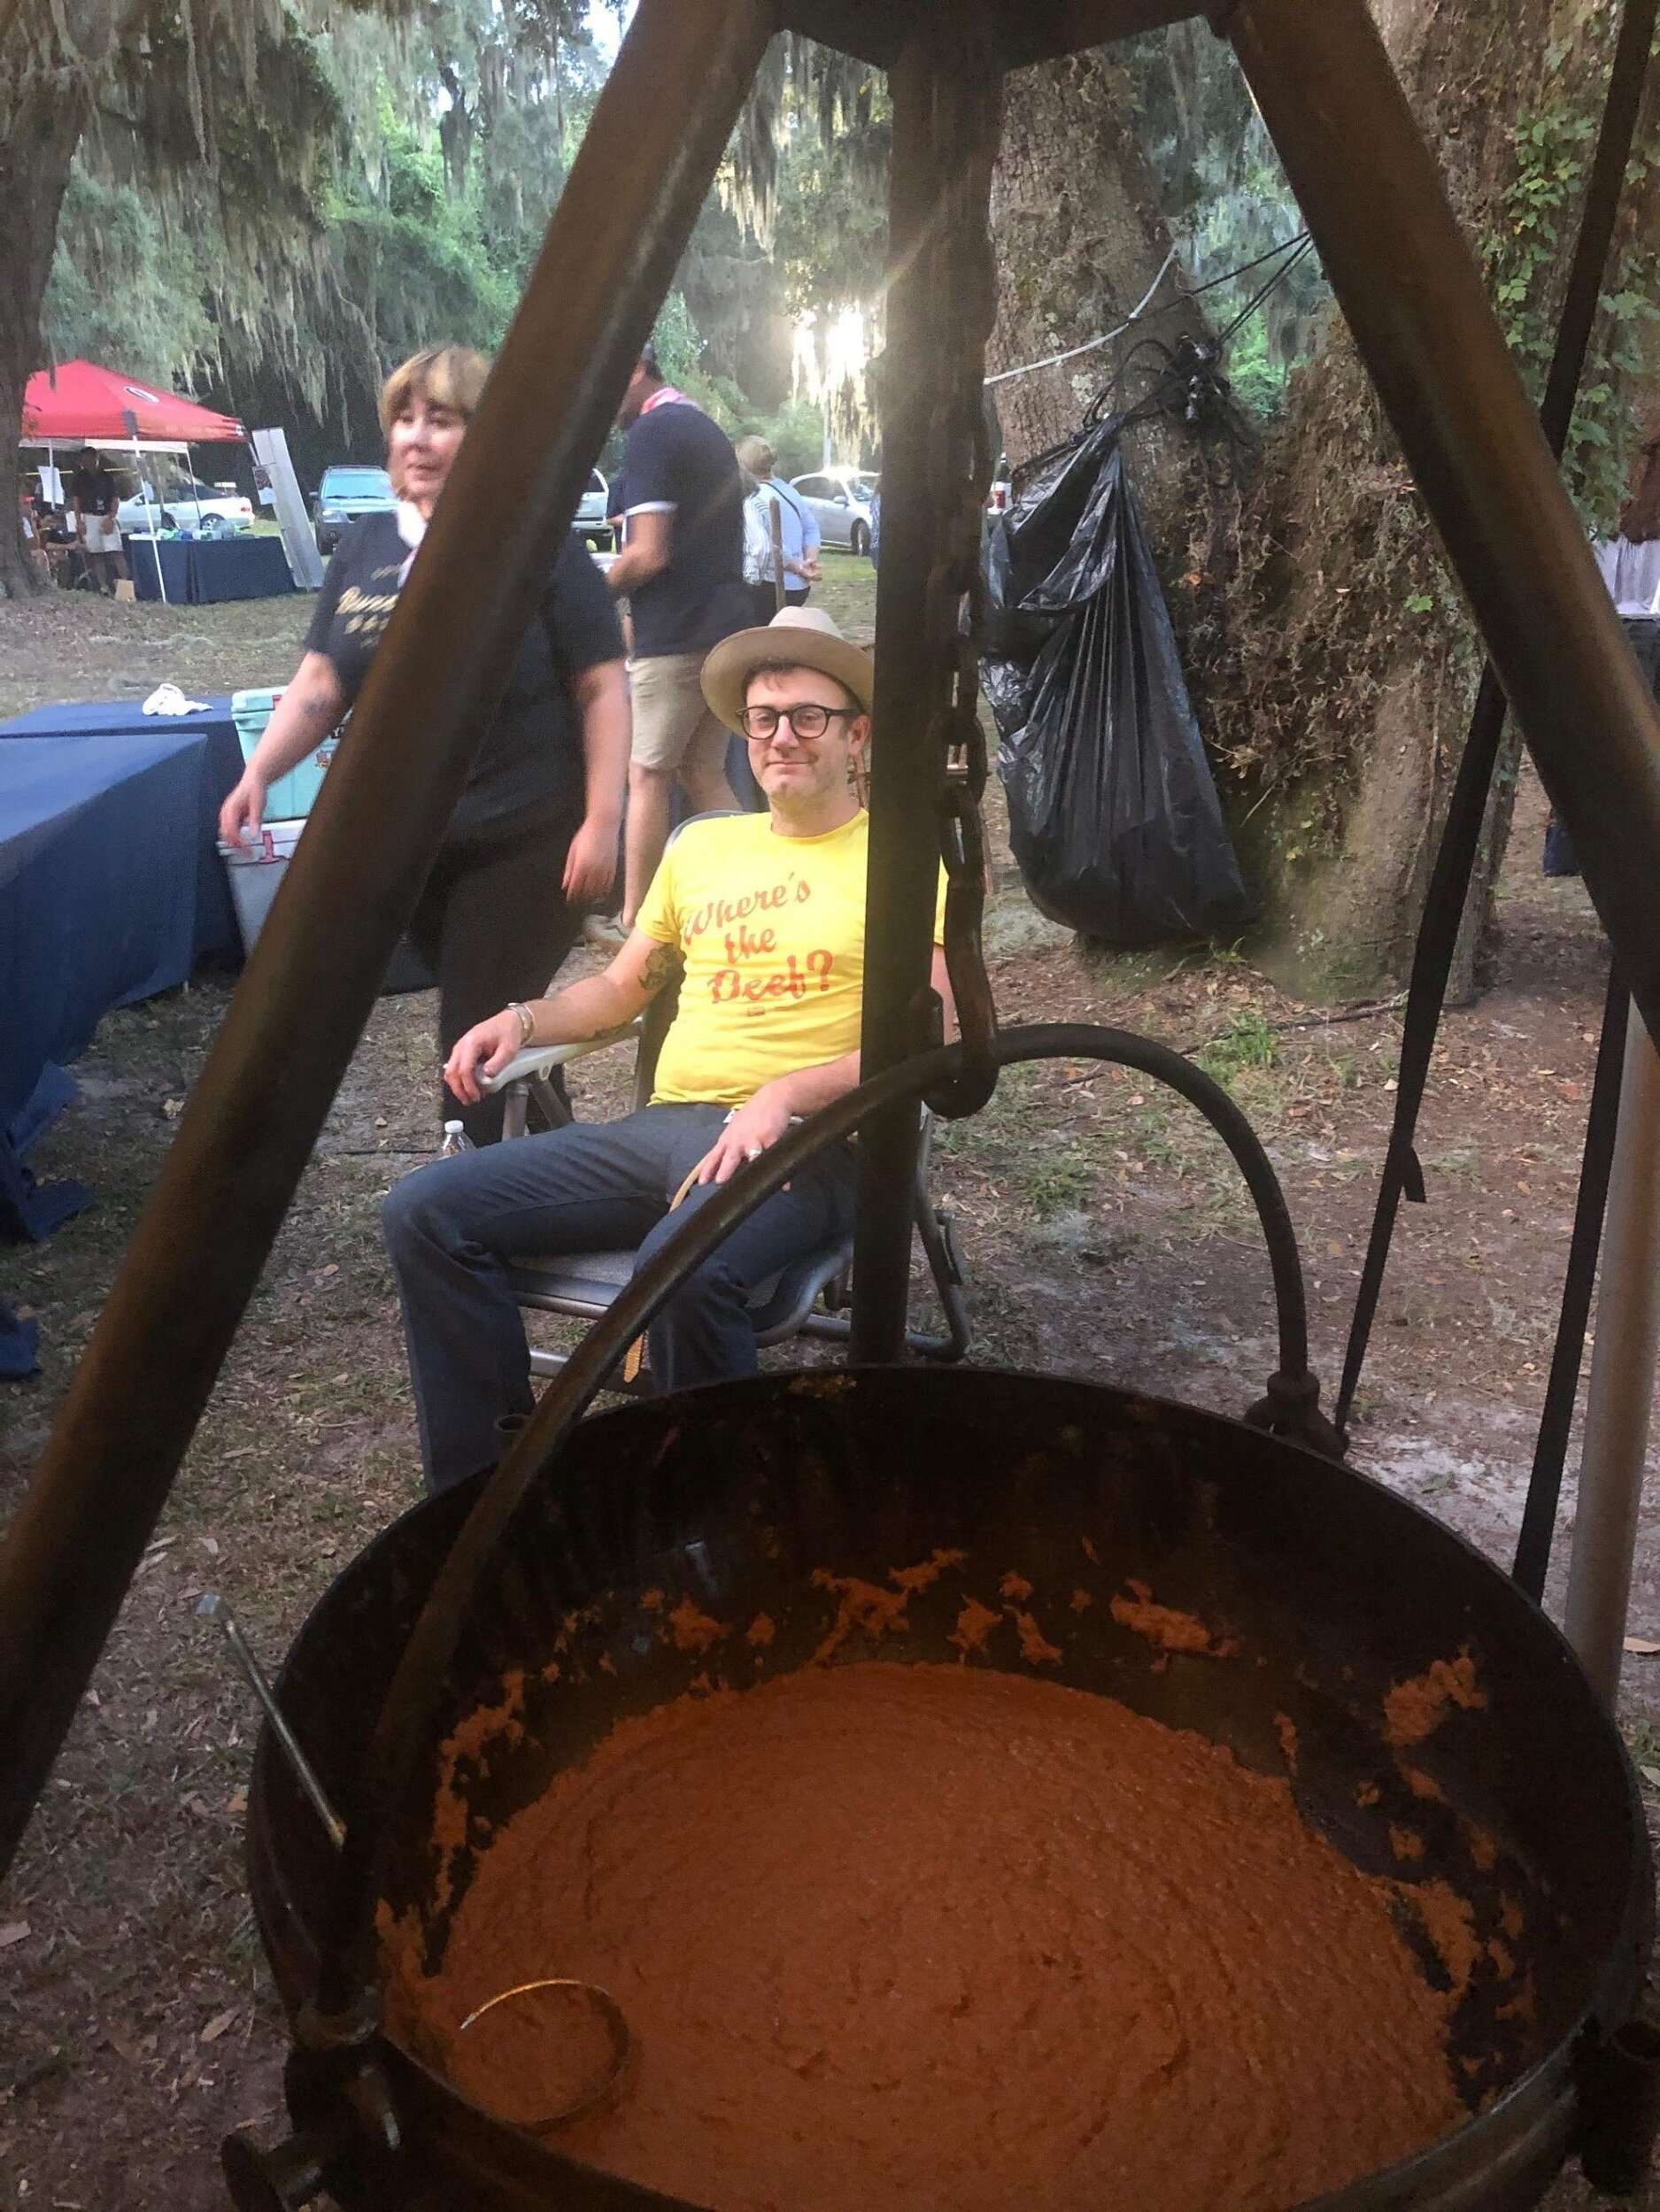 Elliot Moss of Buxton Hall chilling with the cauldron of Hash.